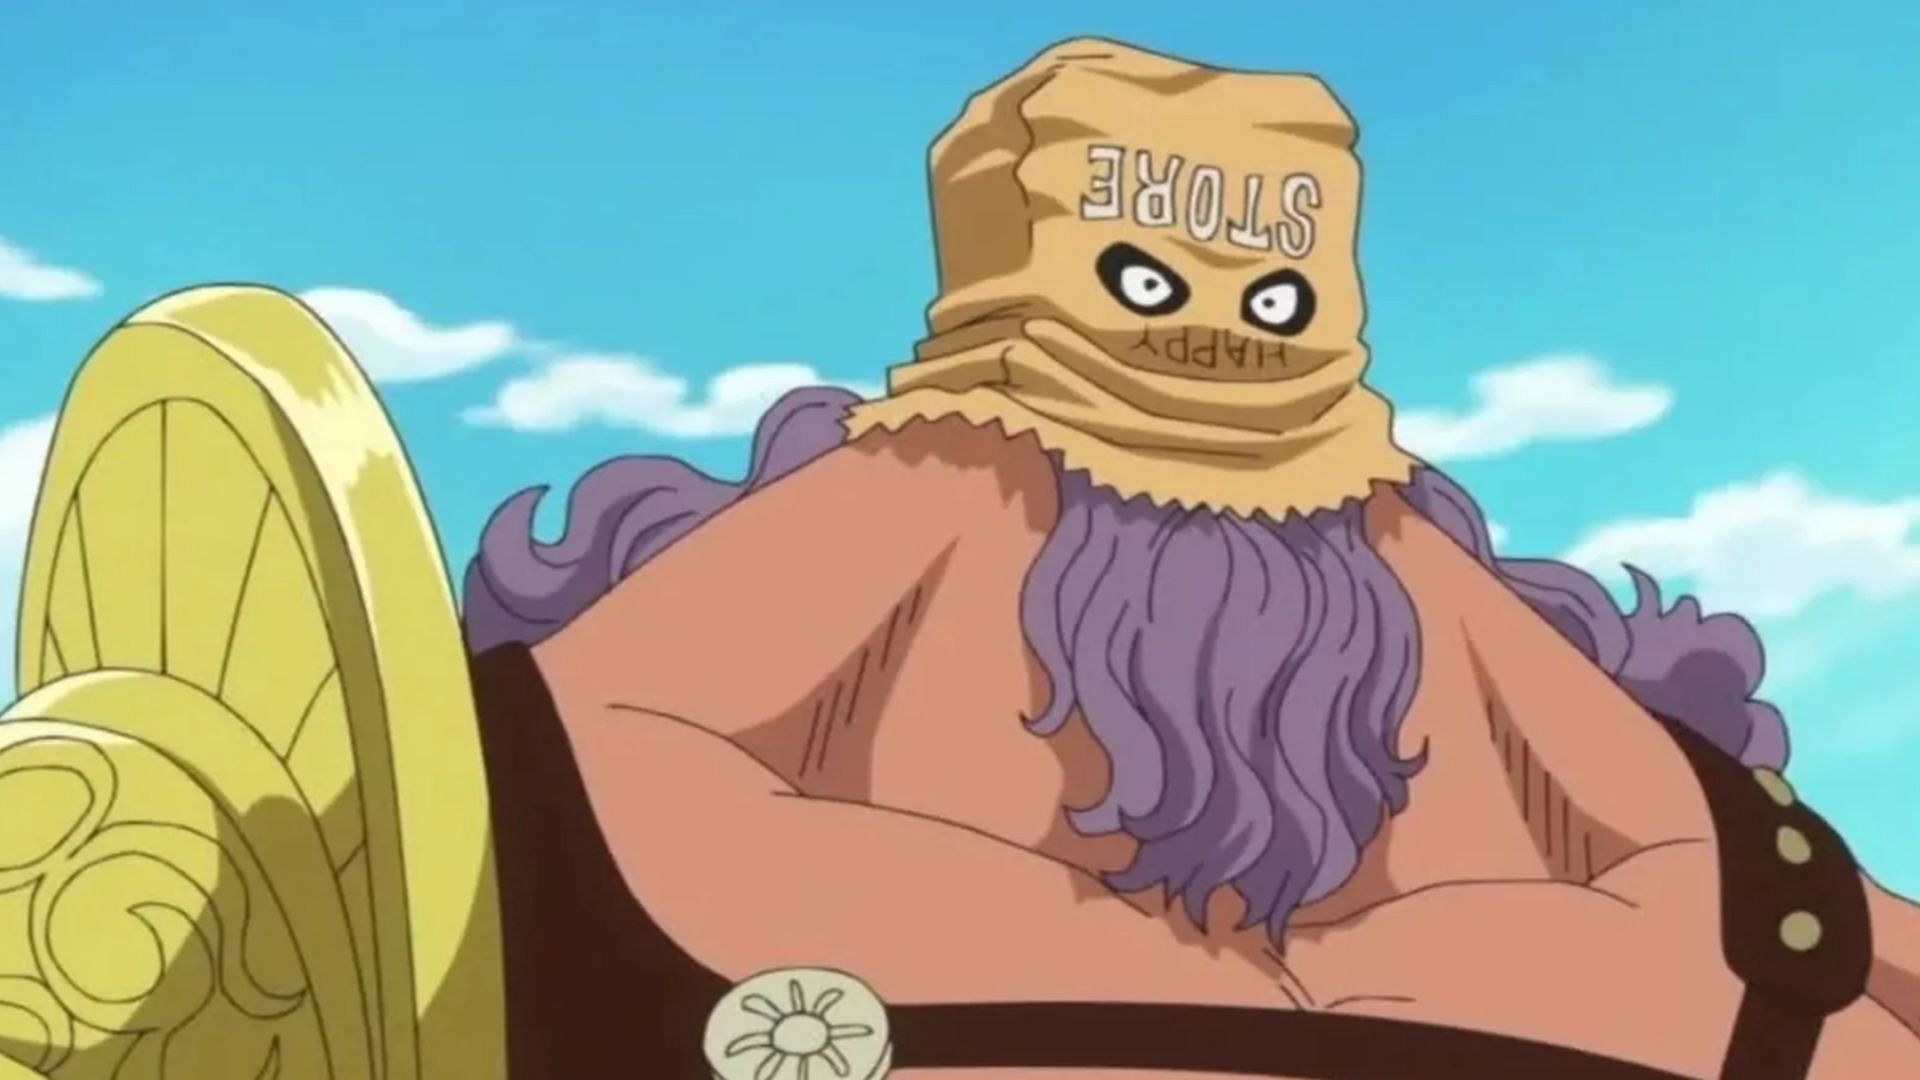 Burgess as &quot;Happy Store&quot; in the One Piece anime (Image via Toei Animation)